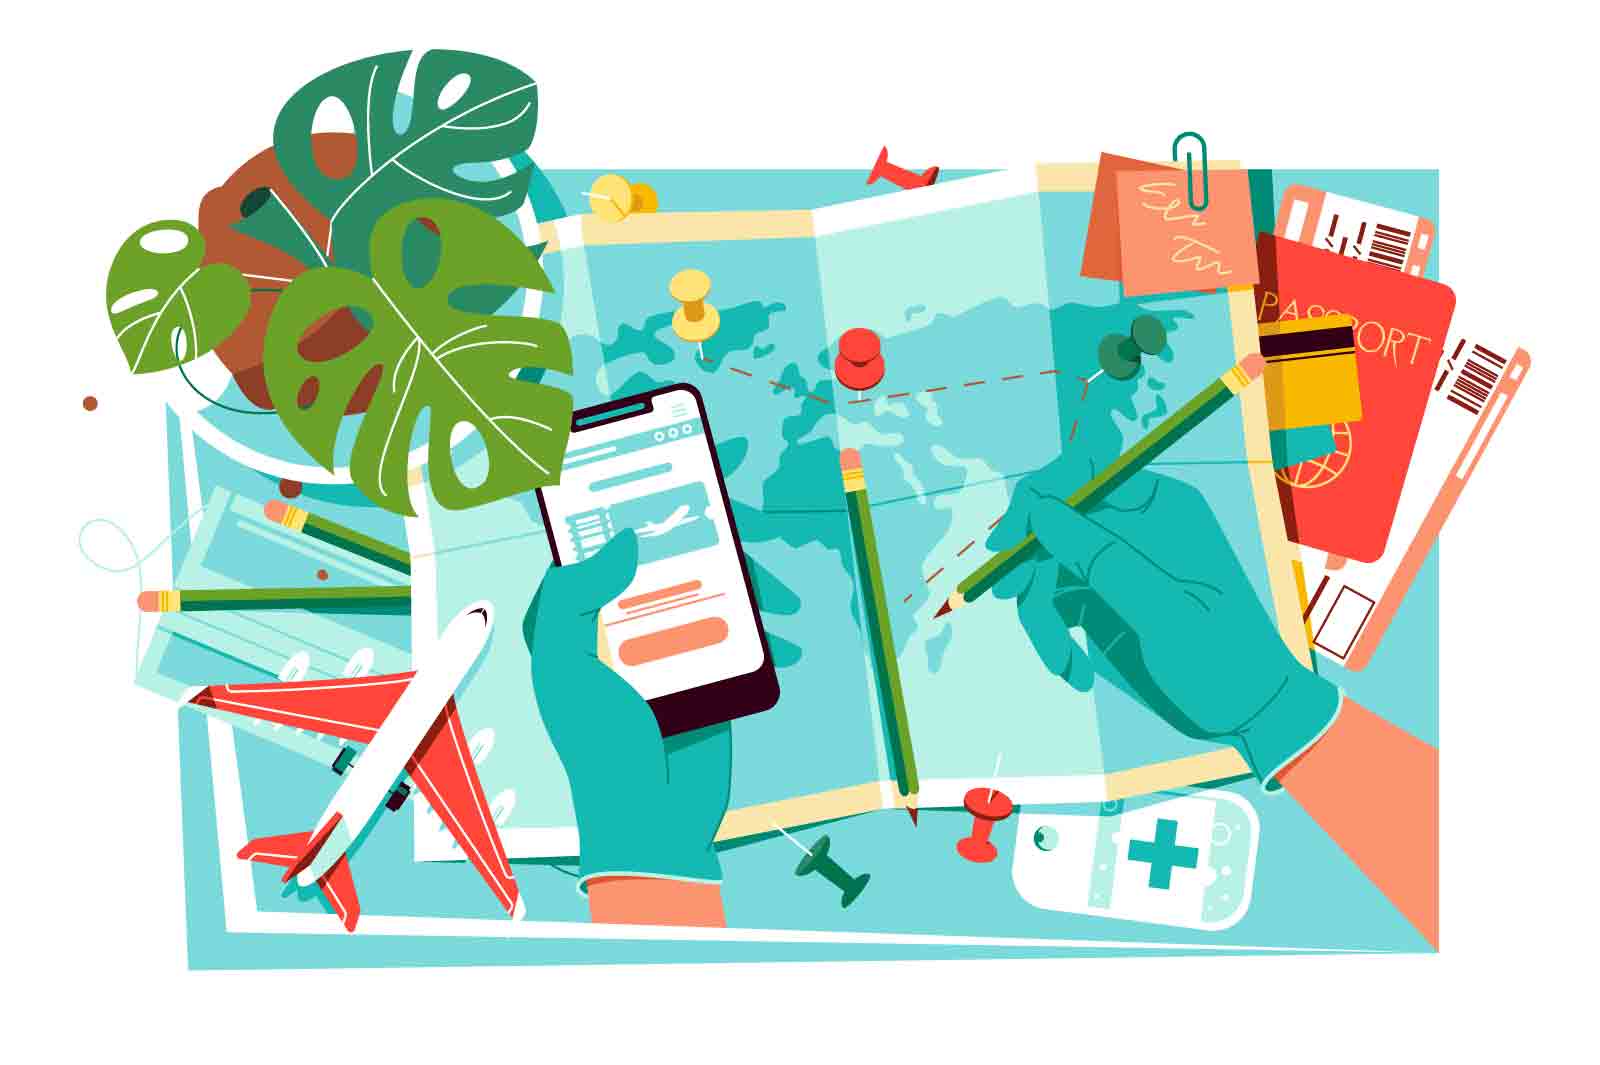 Travelling plan during worldwide pandemic, trip planning vector illustration. Person hands in gloves, map, passport and tickets